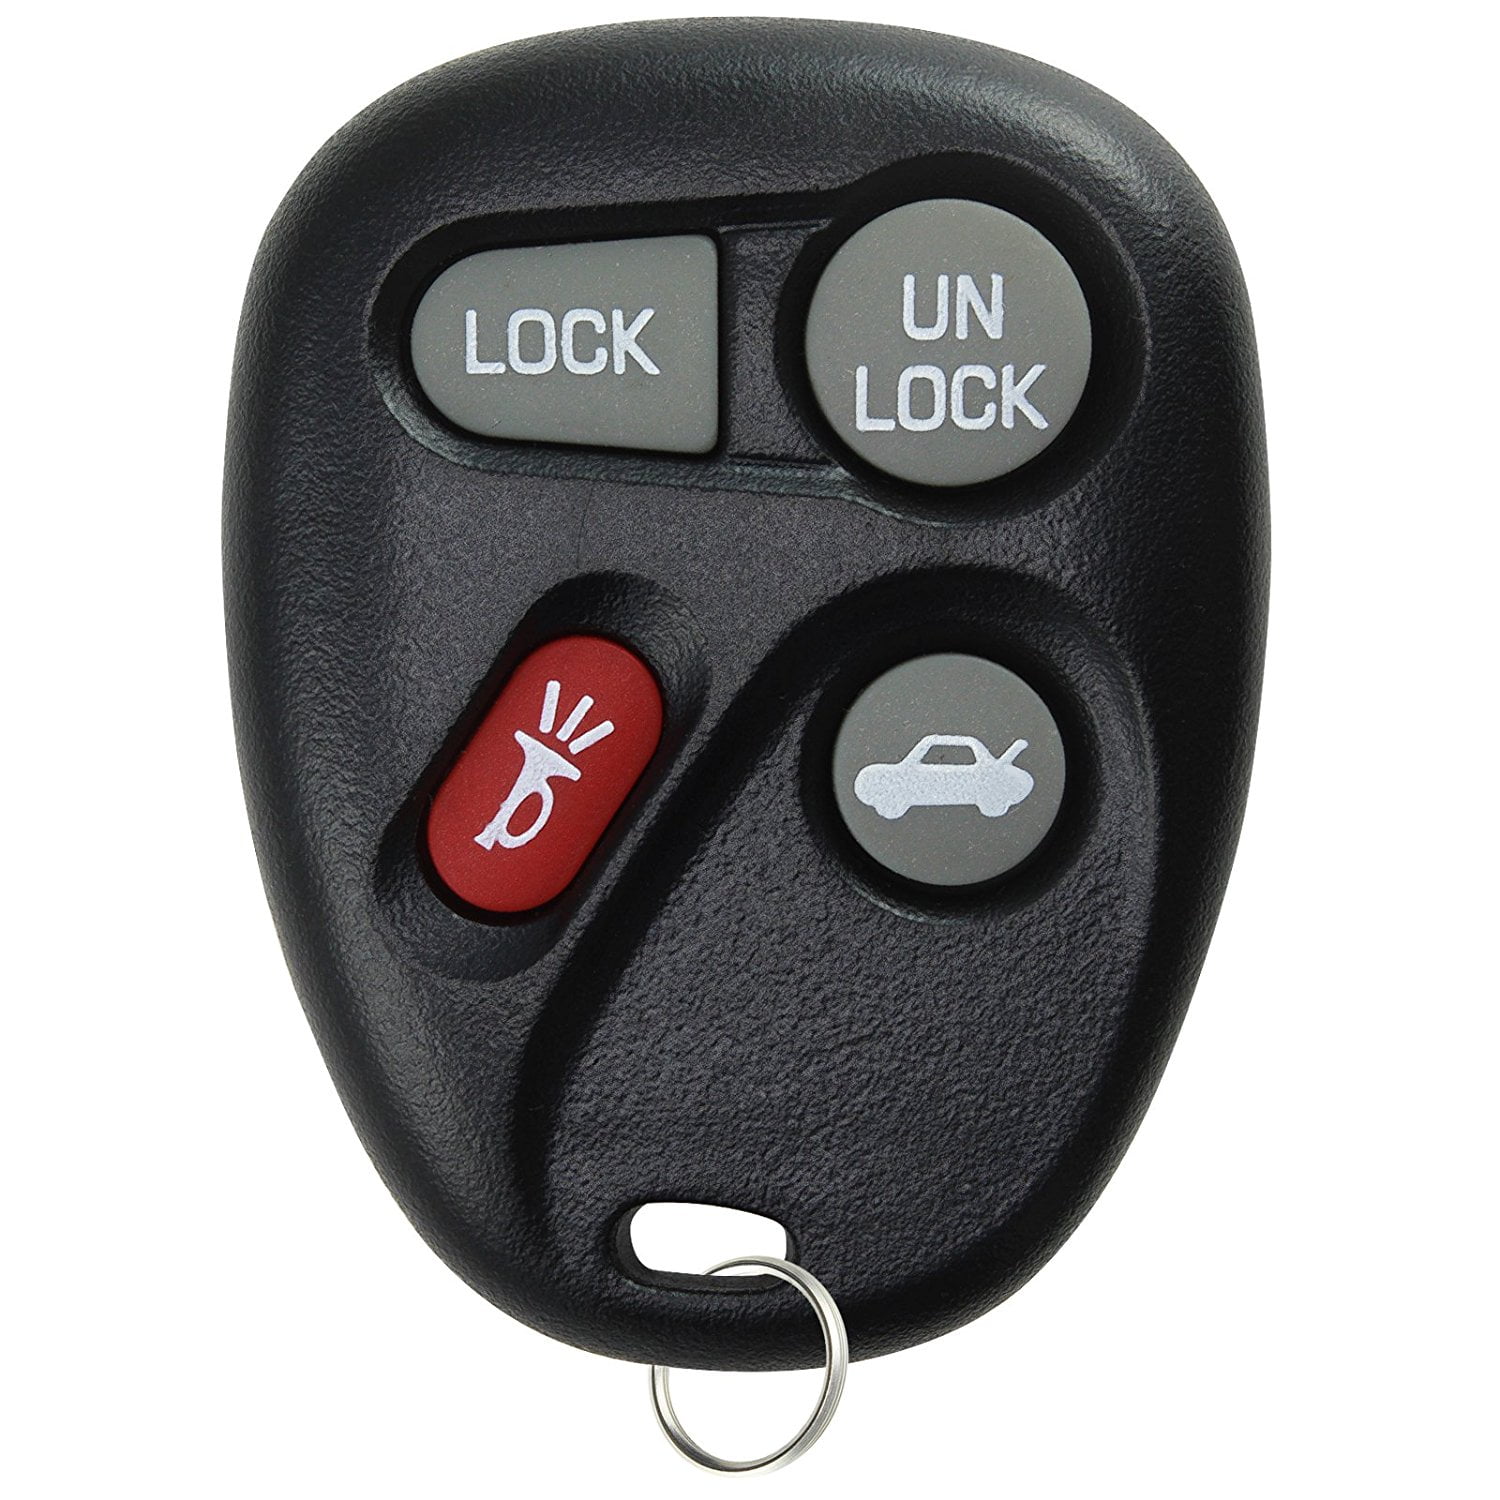 New Keyless Entry Remote Key Fob Transmitter Clicker for GM Chevy Saturn Buick 